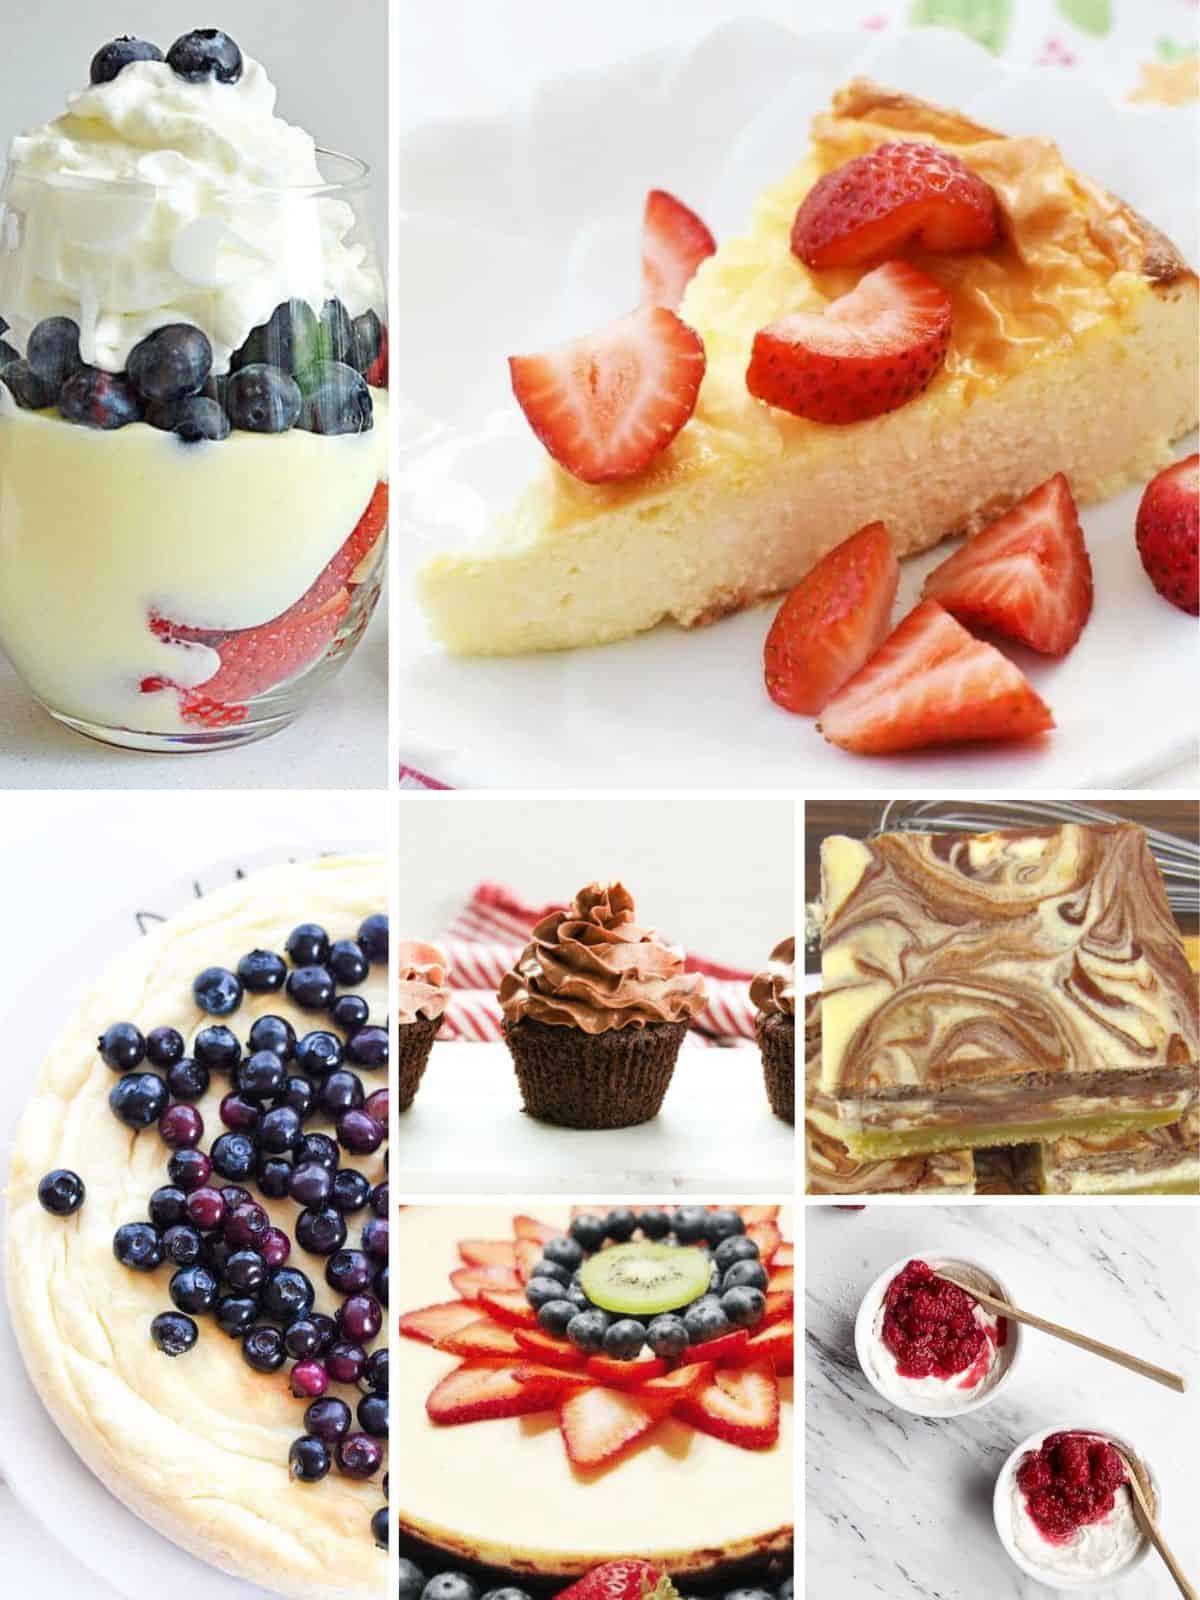 A collection of desserts with low sugar or no sugar for diabetics.